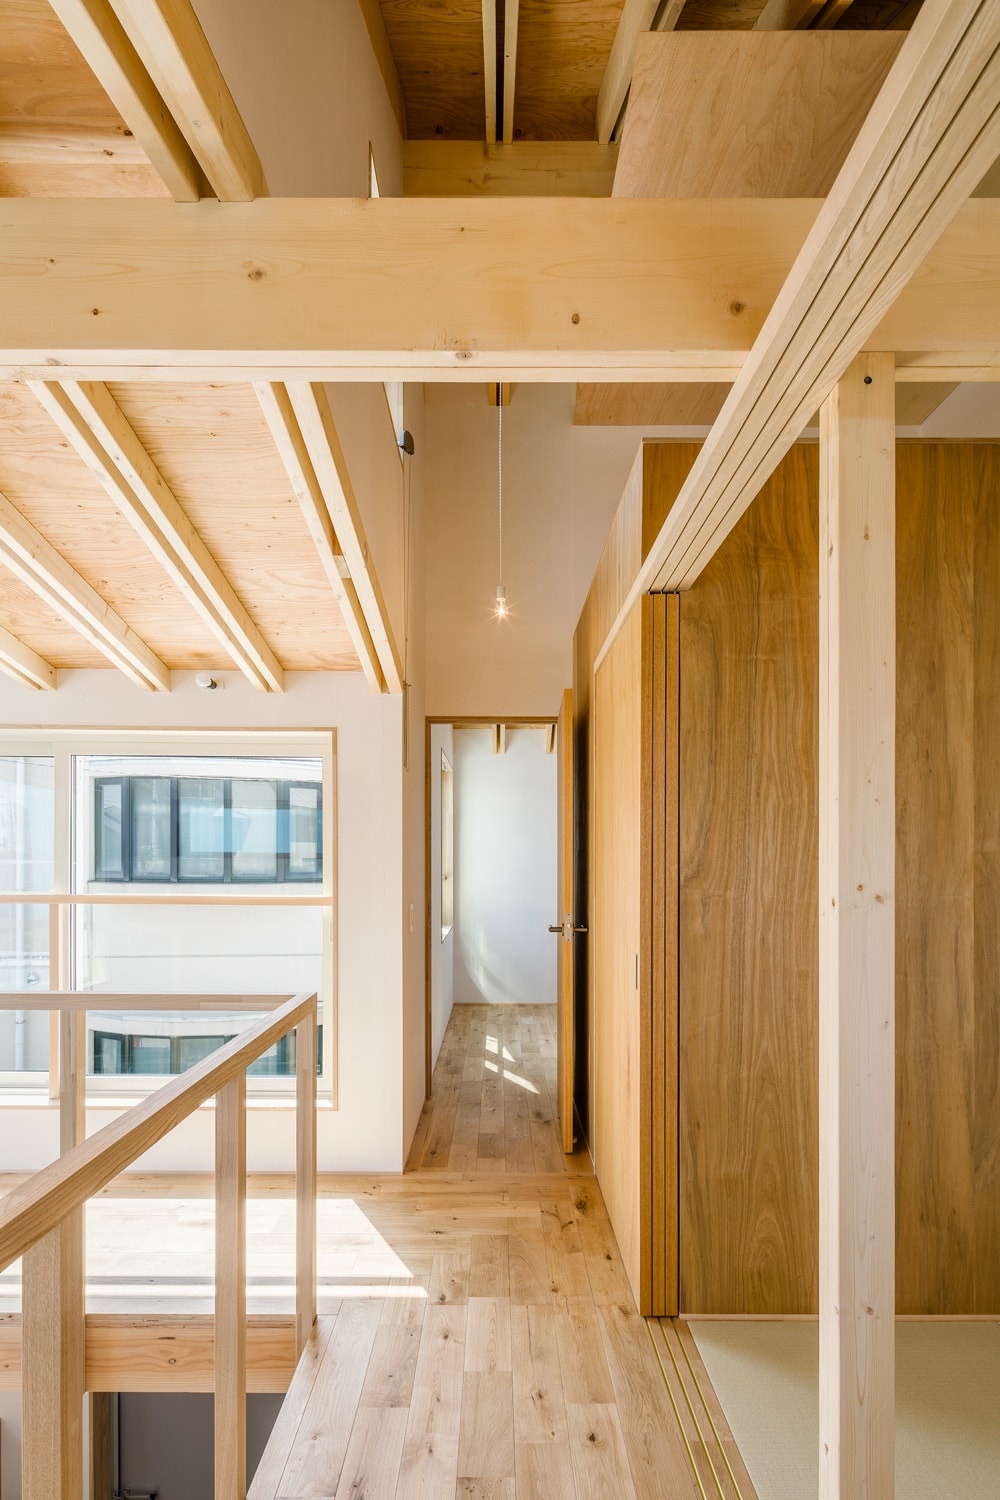 Keeping Life Simple: SNARK+OUVI's House in Chiba